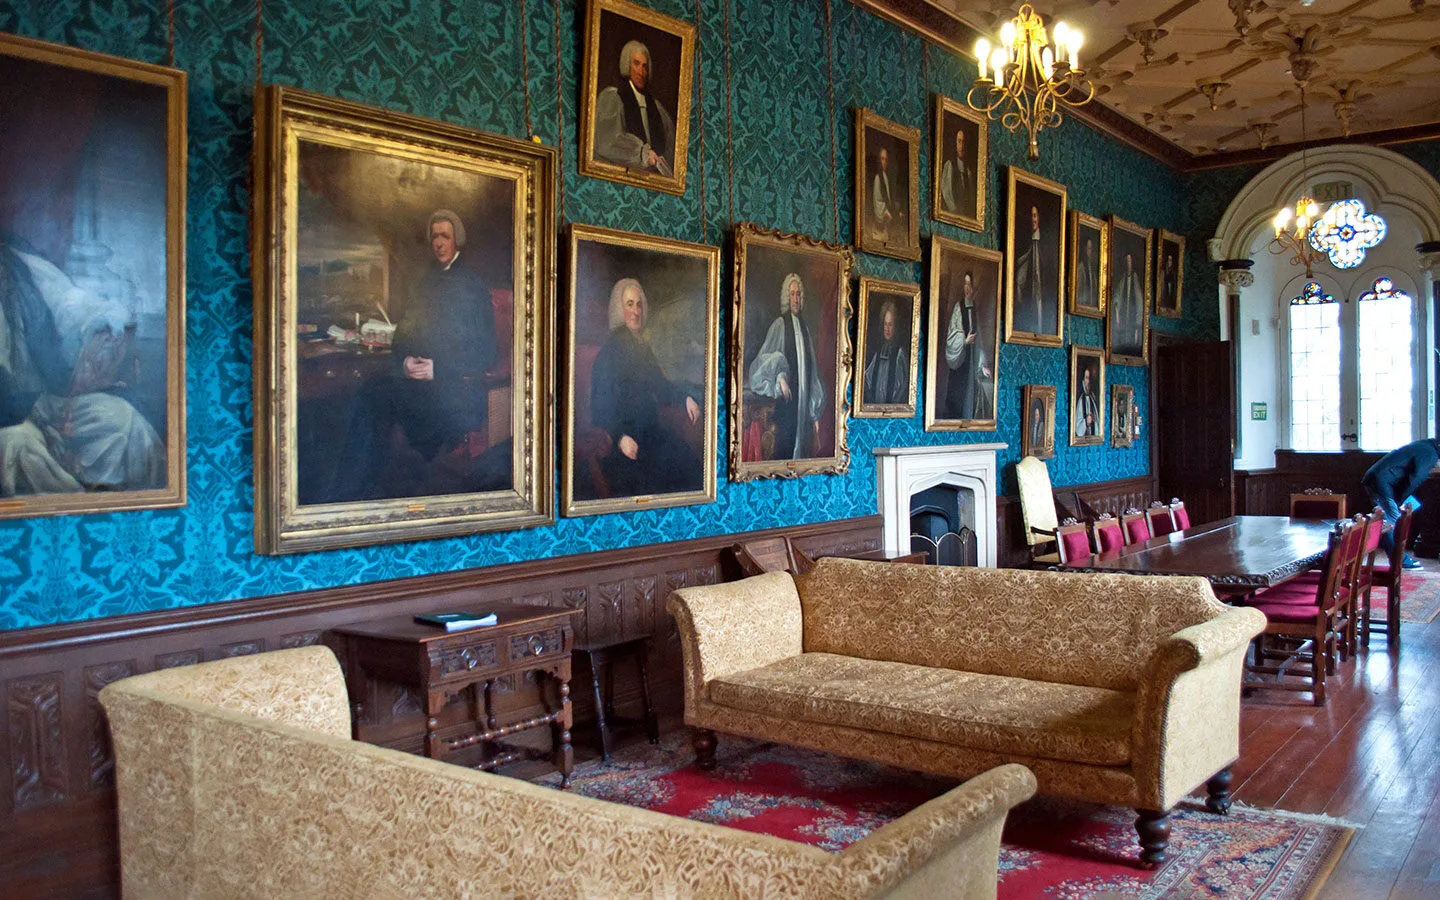 Inside the Bishop's Palace in Wells, Somerset